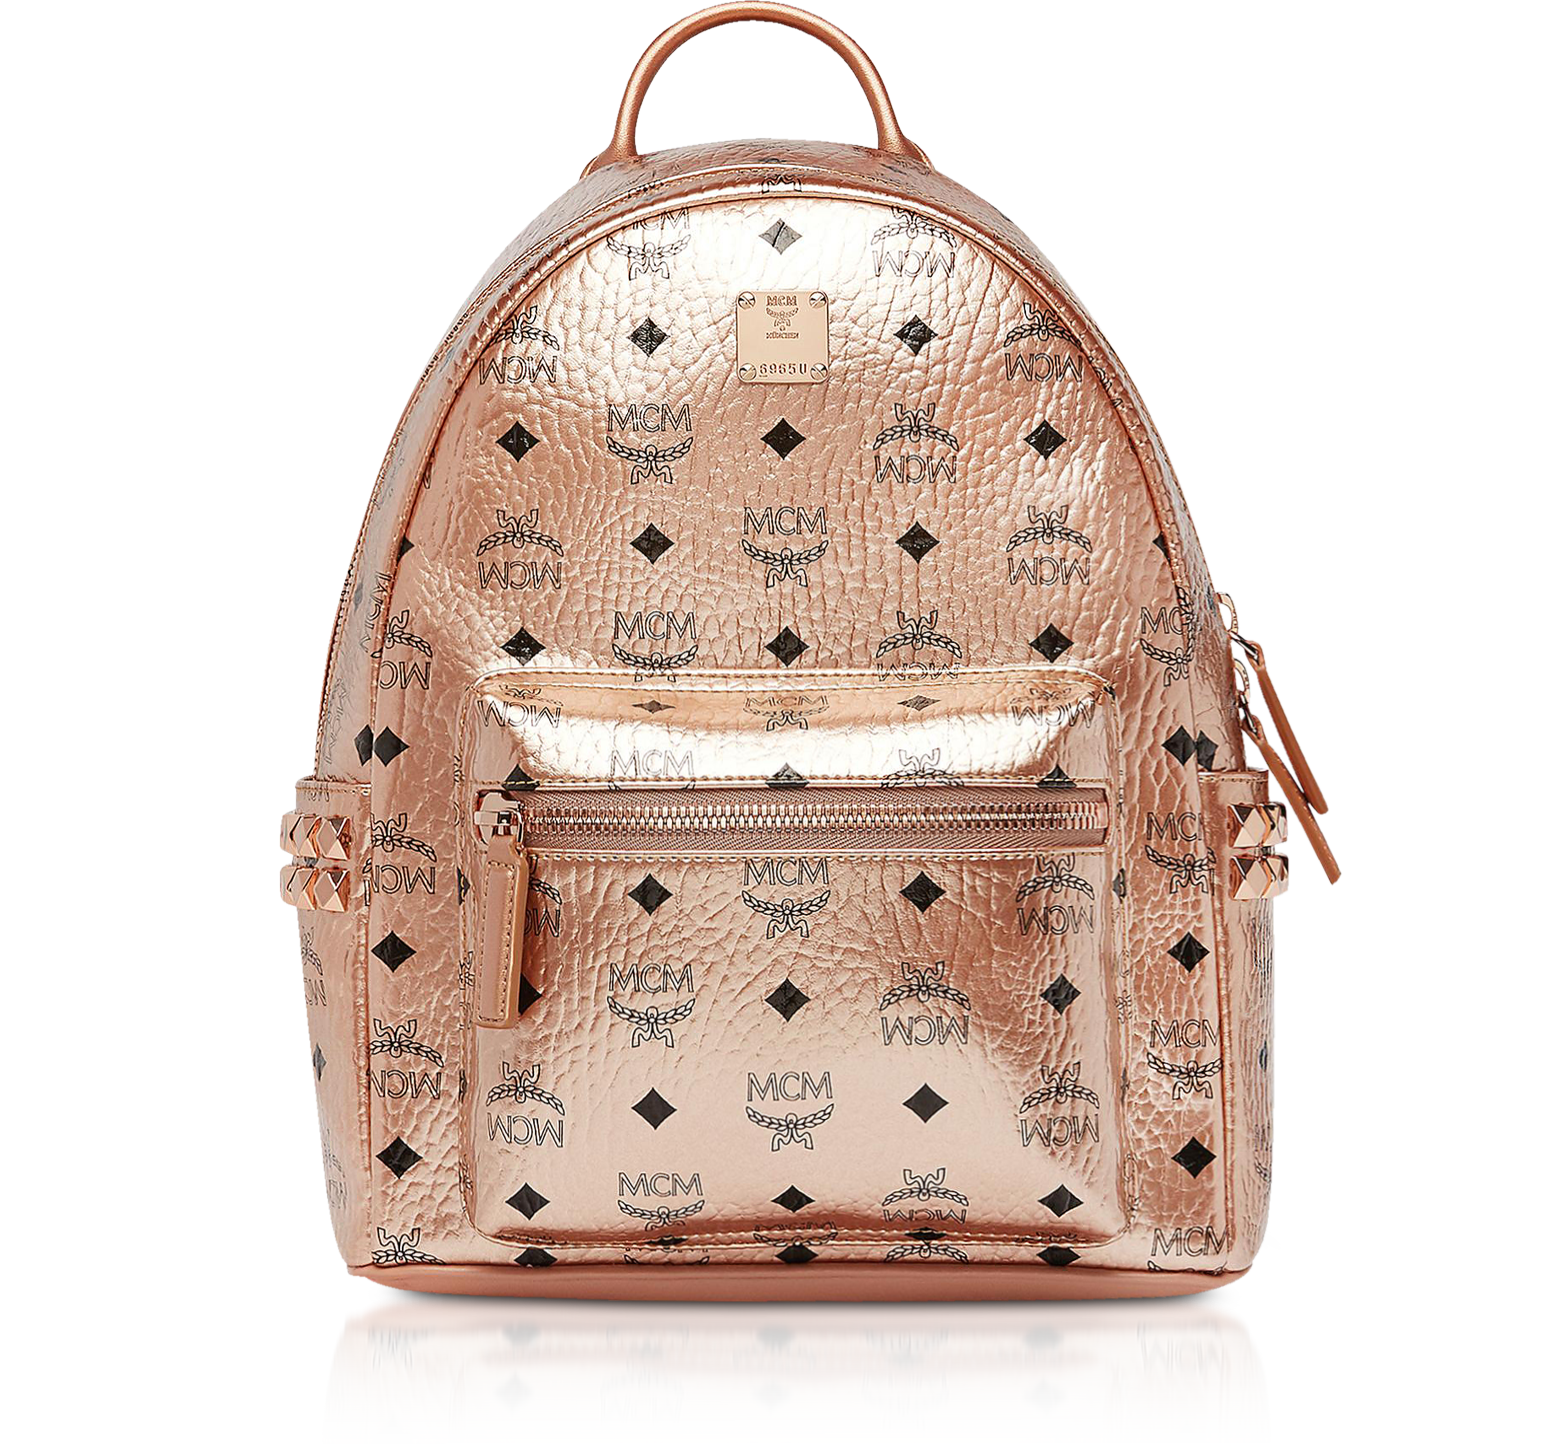 MCM Champagne Gold Mini Stark Backpack at FORZIERI